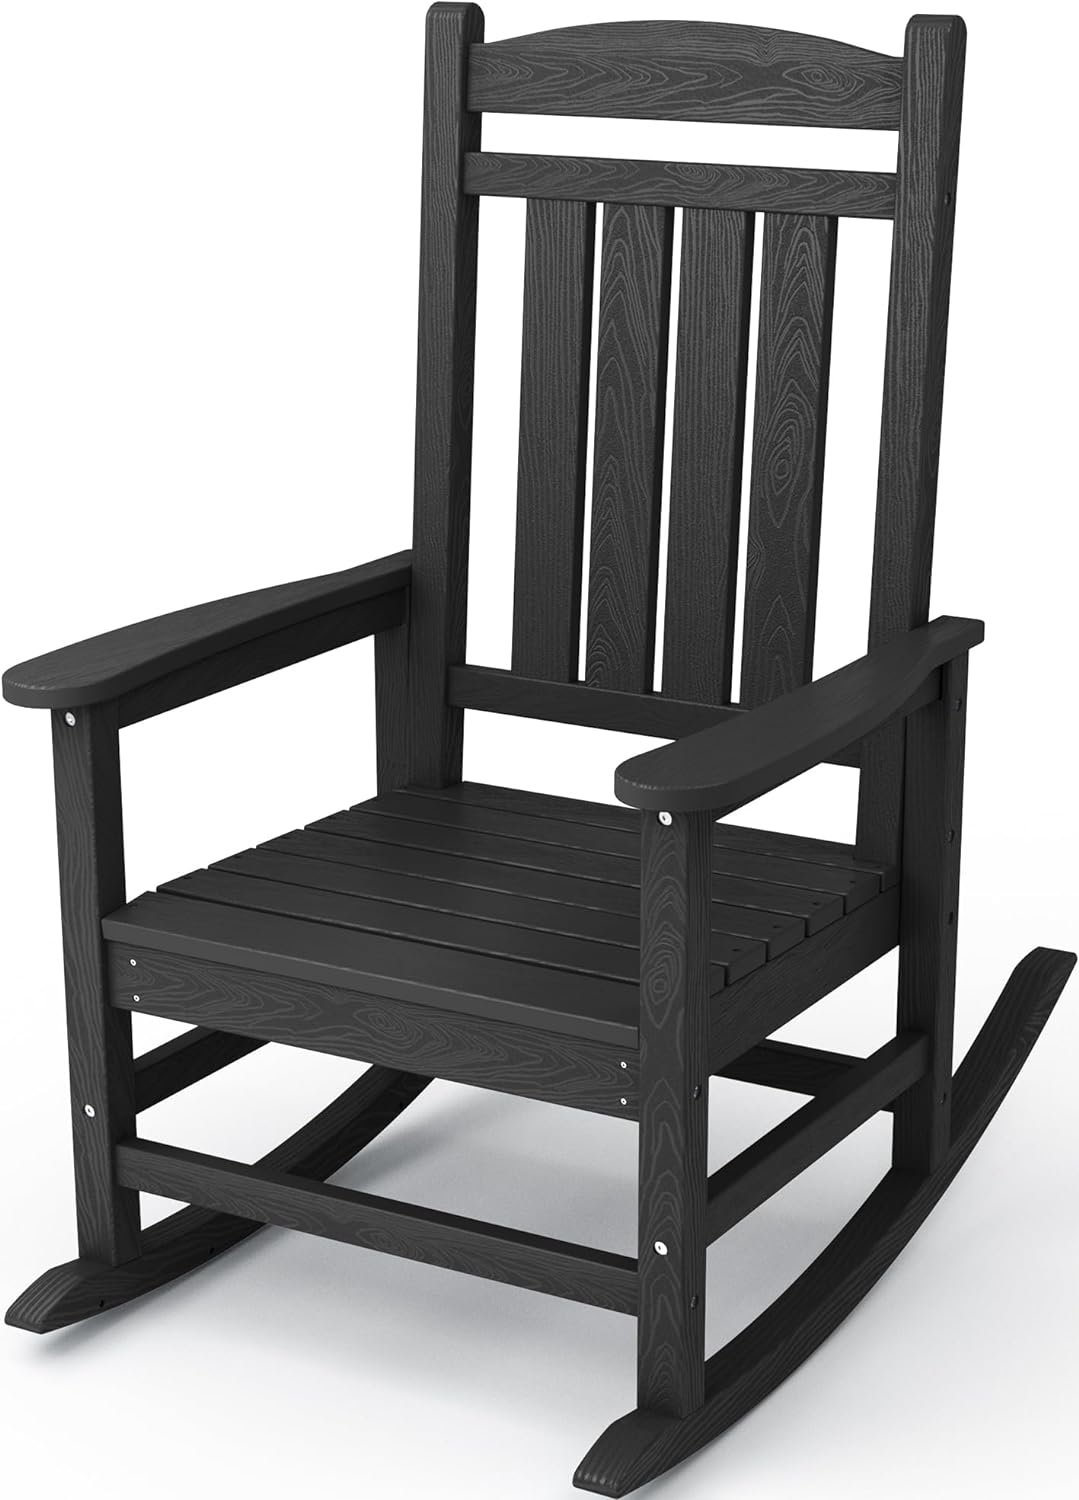 KINGYES Outdoor Rocking Chairs Review